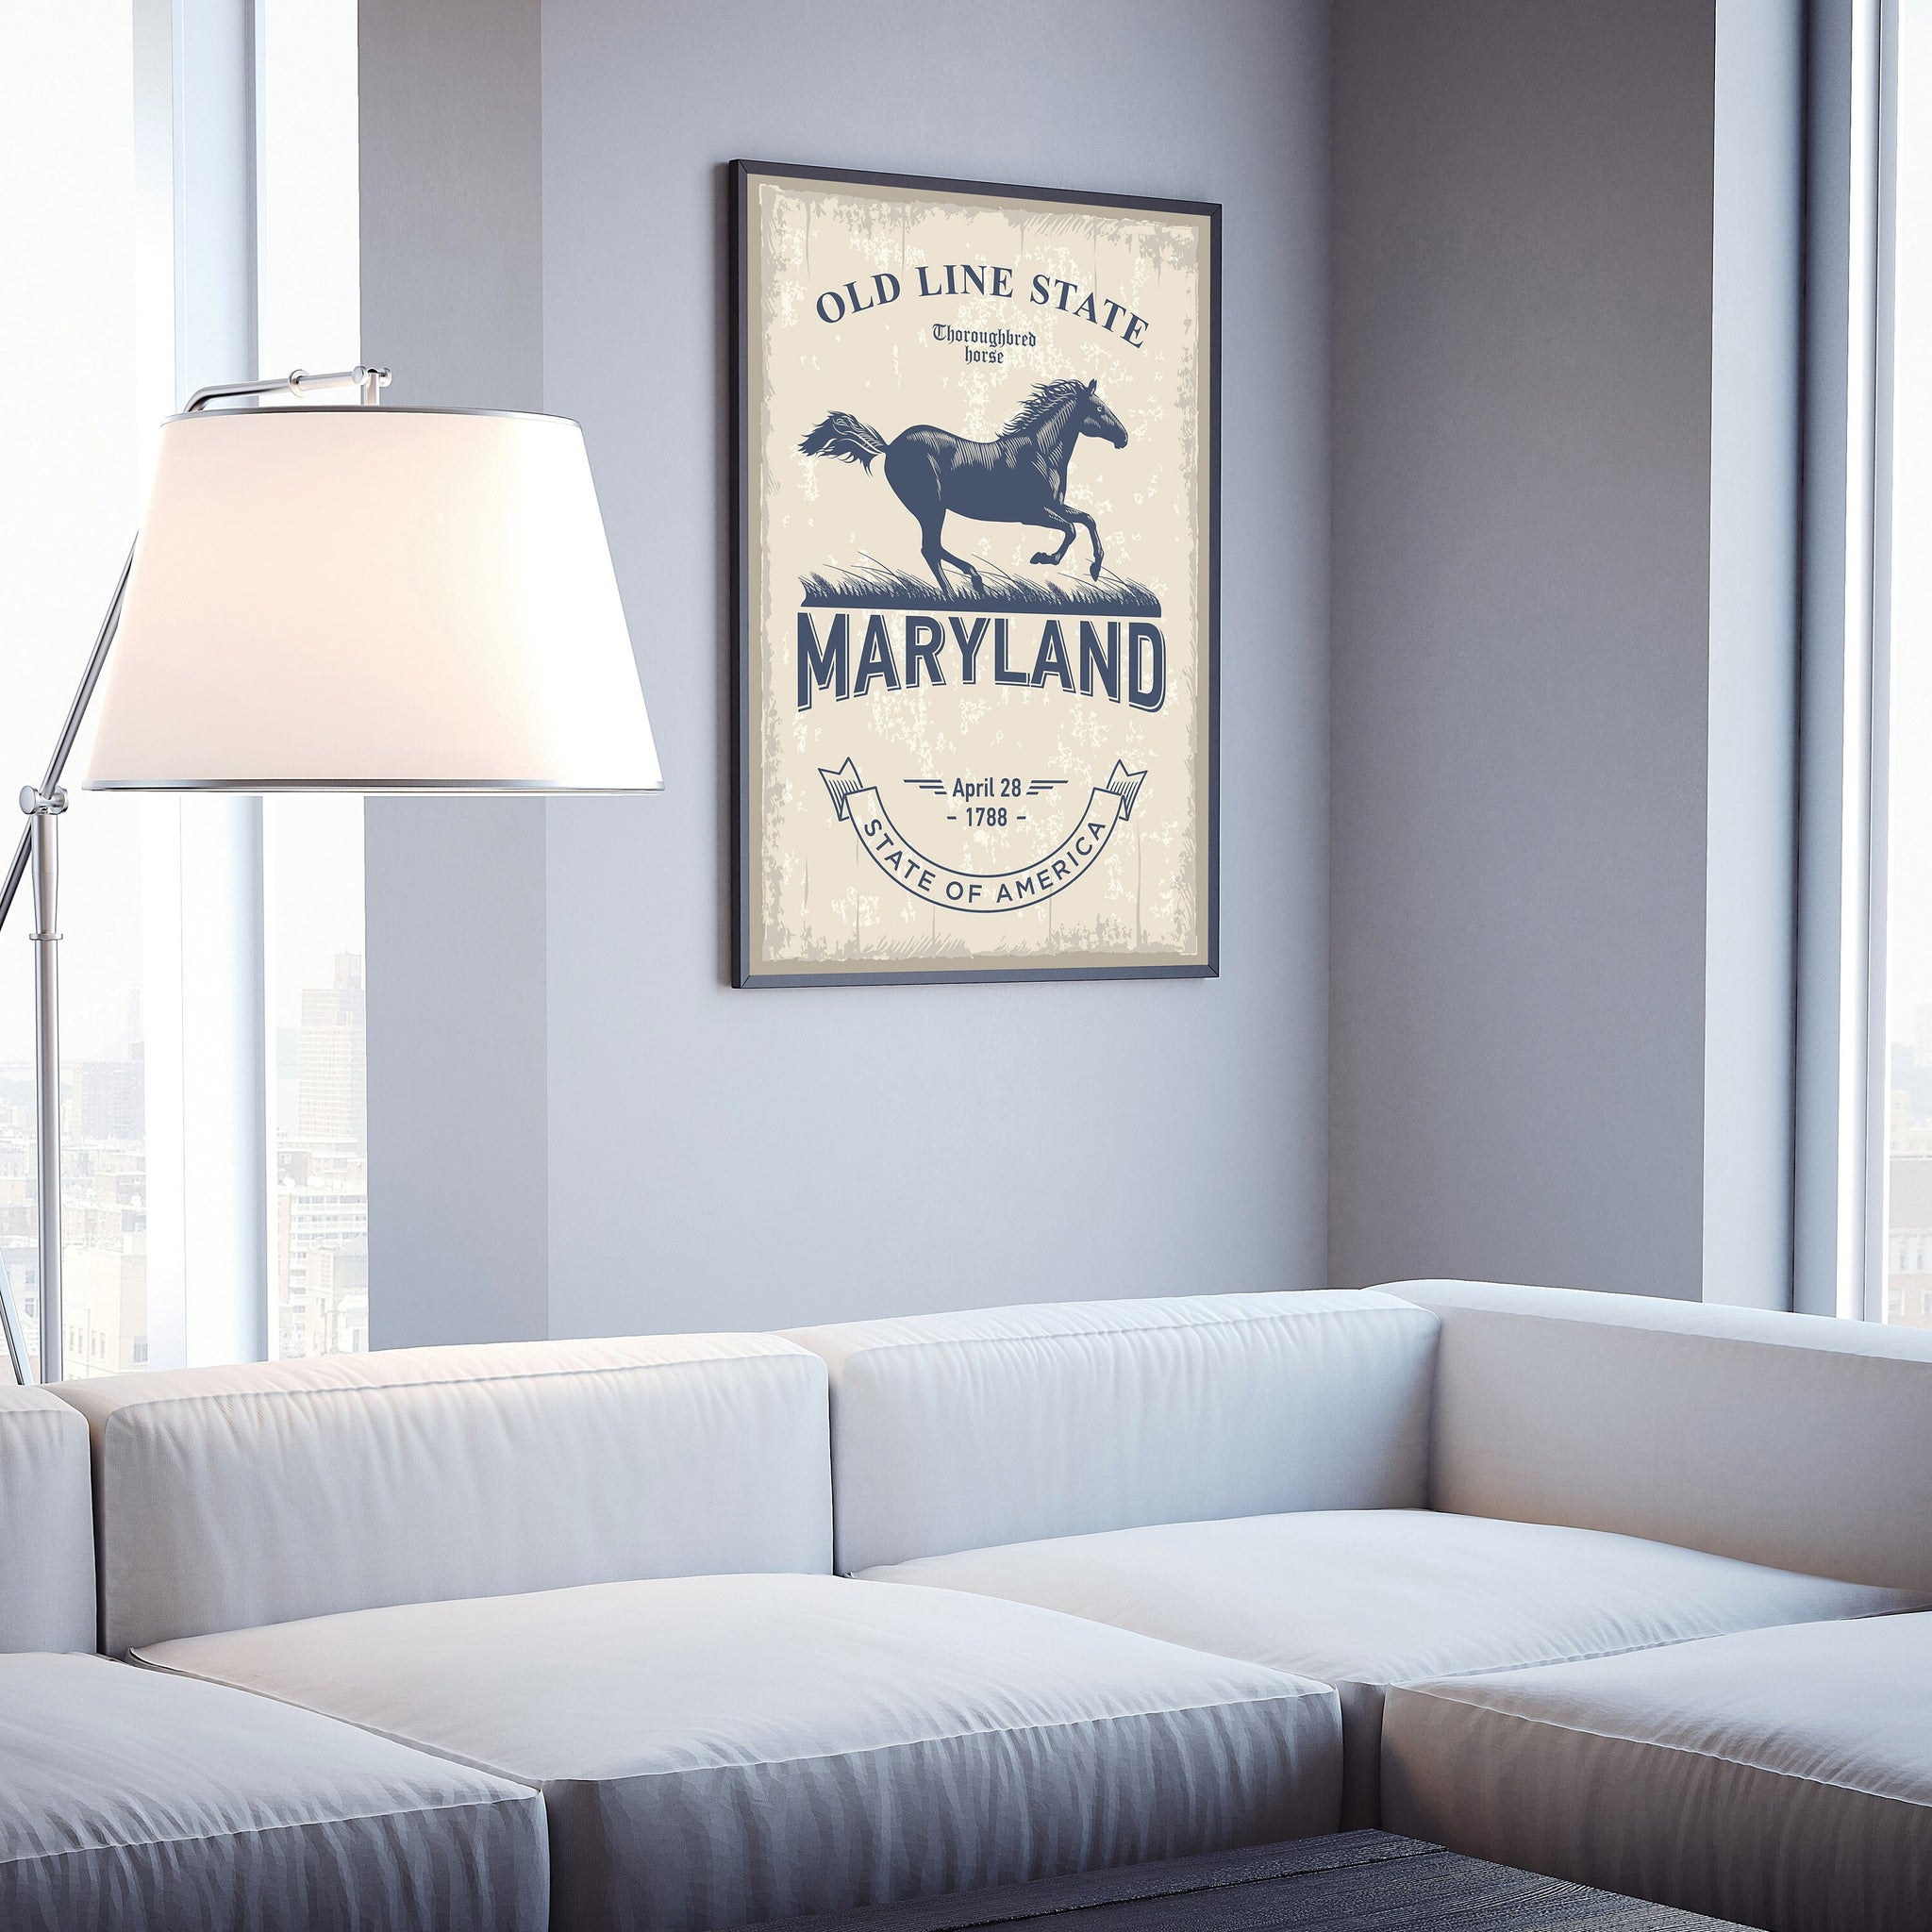 Maryland State Symbol Poster, Maryland State Poster Print, Maryland State Emblem Poster, Retro Travel State Poster, Home and Office Wall Art